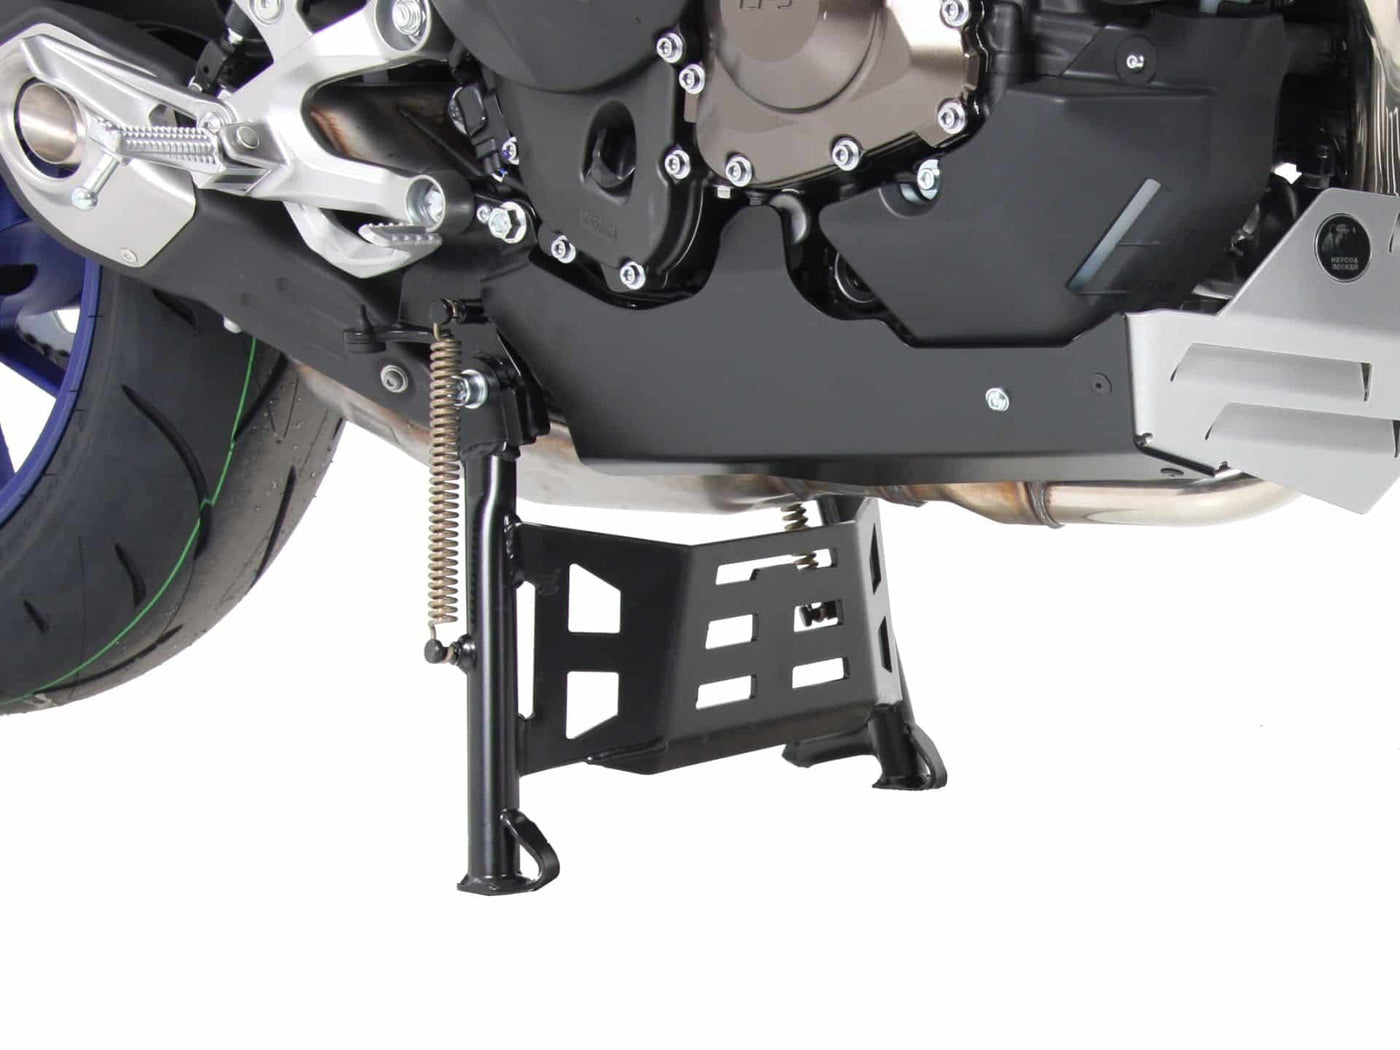 Center Stand for YAMAHA MT-09 / MT-09 SP / XSR 900